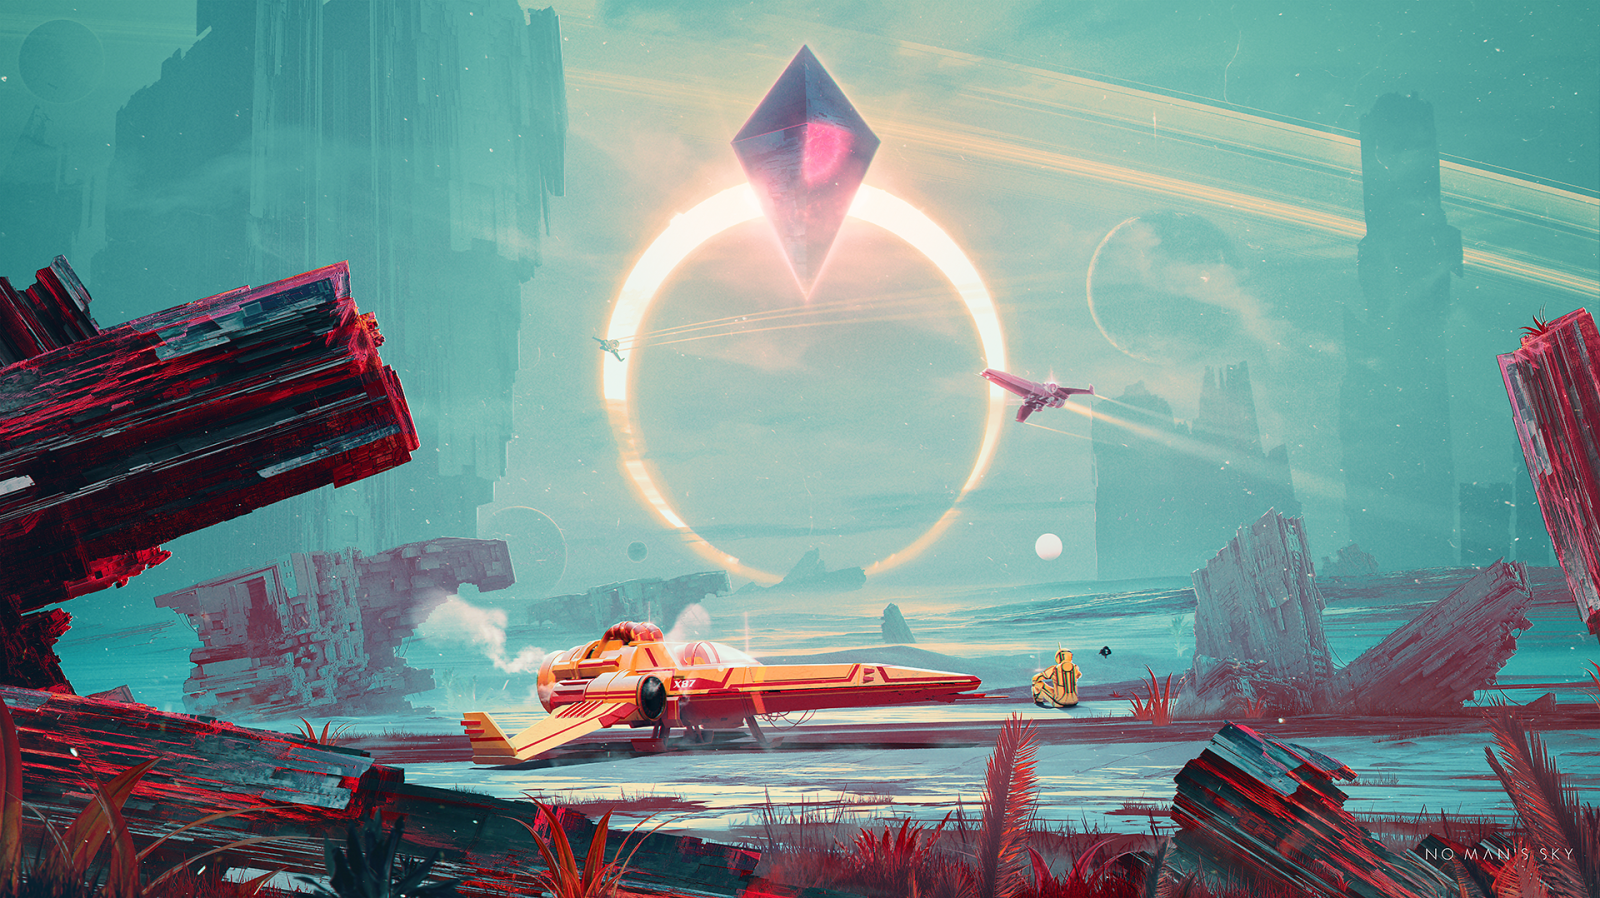 No Man's Sky Everything you need to know about the PS4 and PC epic